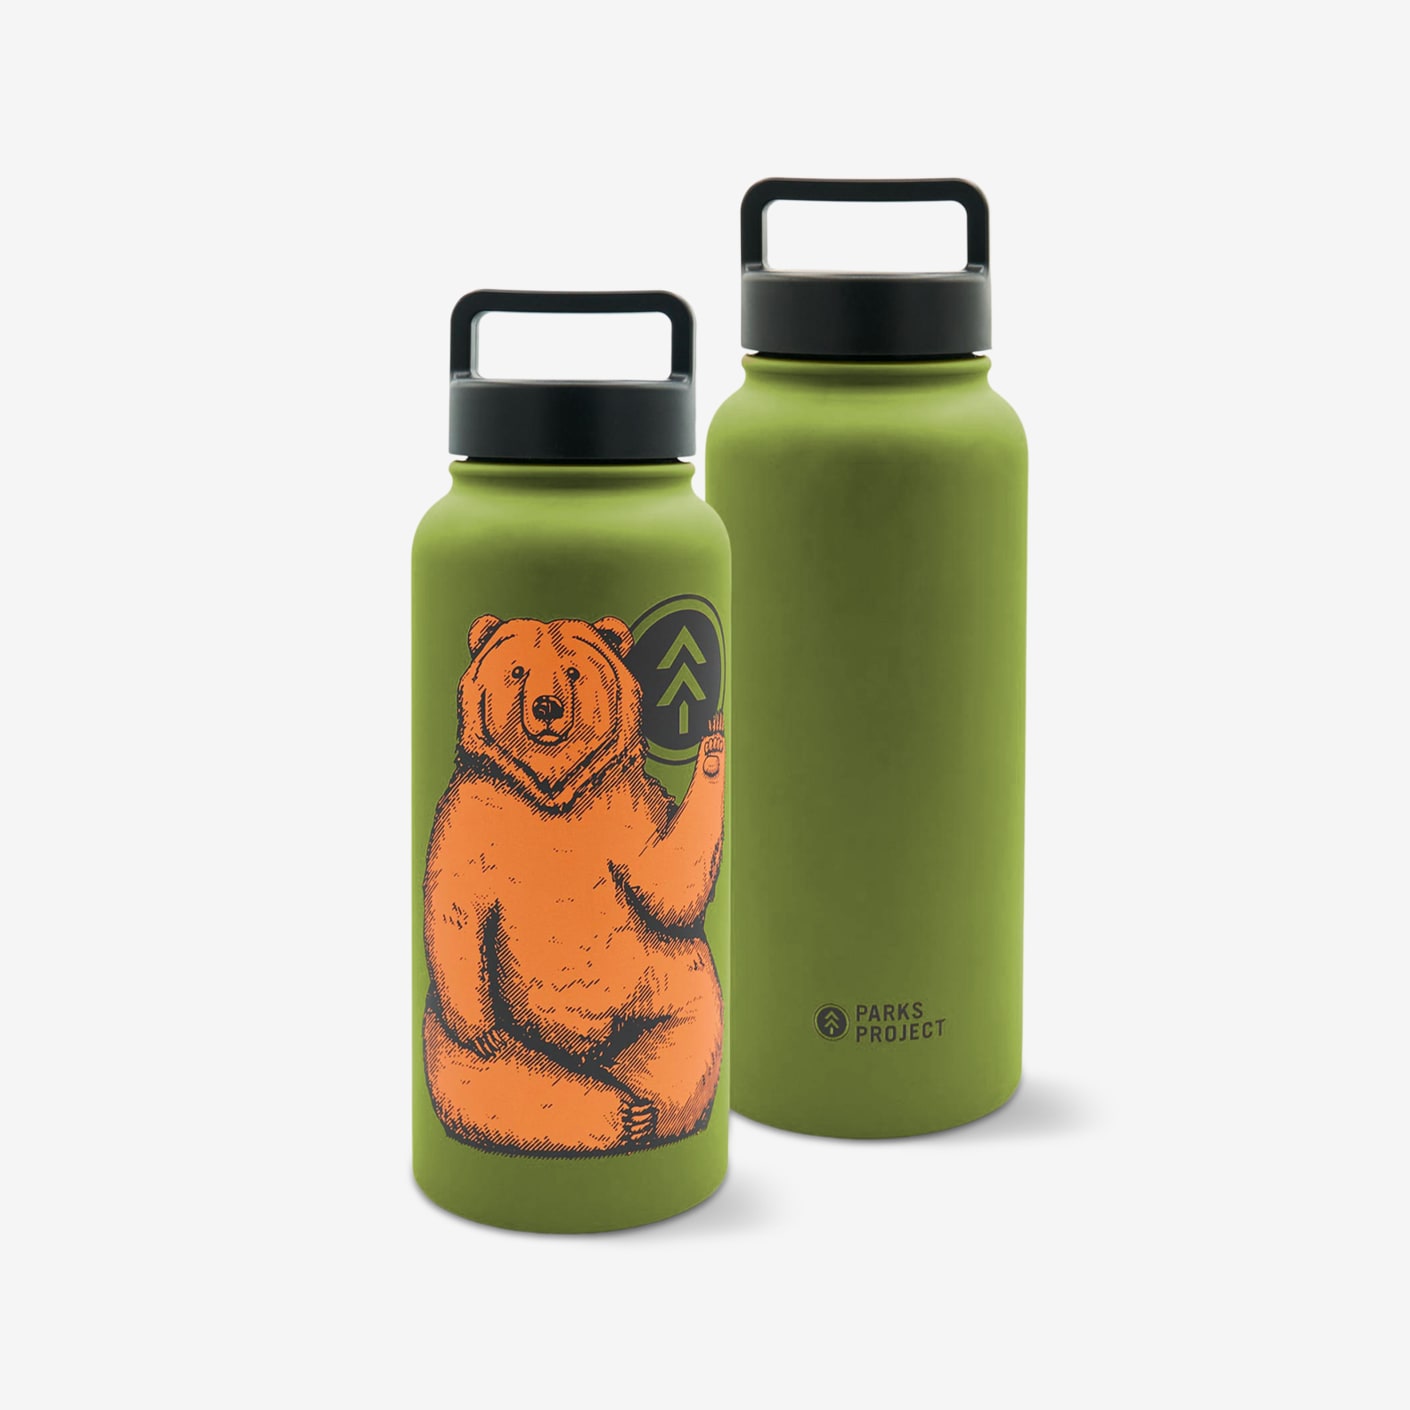 Parks Project 32 oz Insulated Water Bottle - Black/Turquoise - One Size